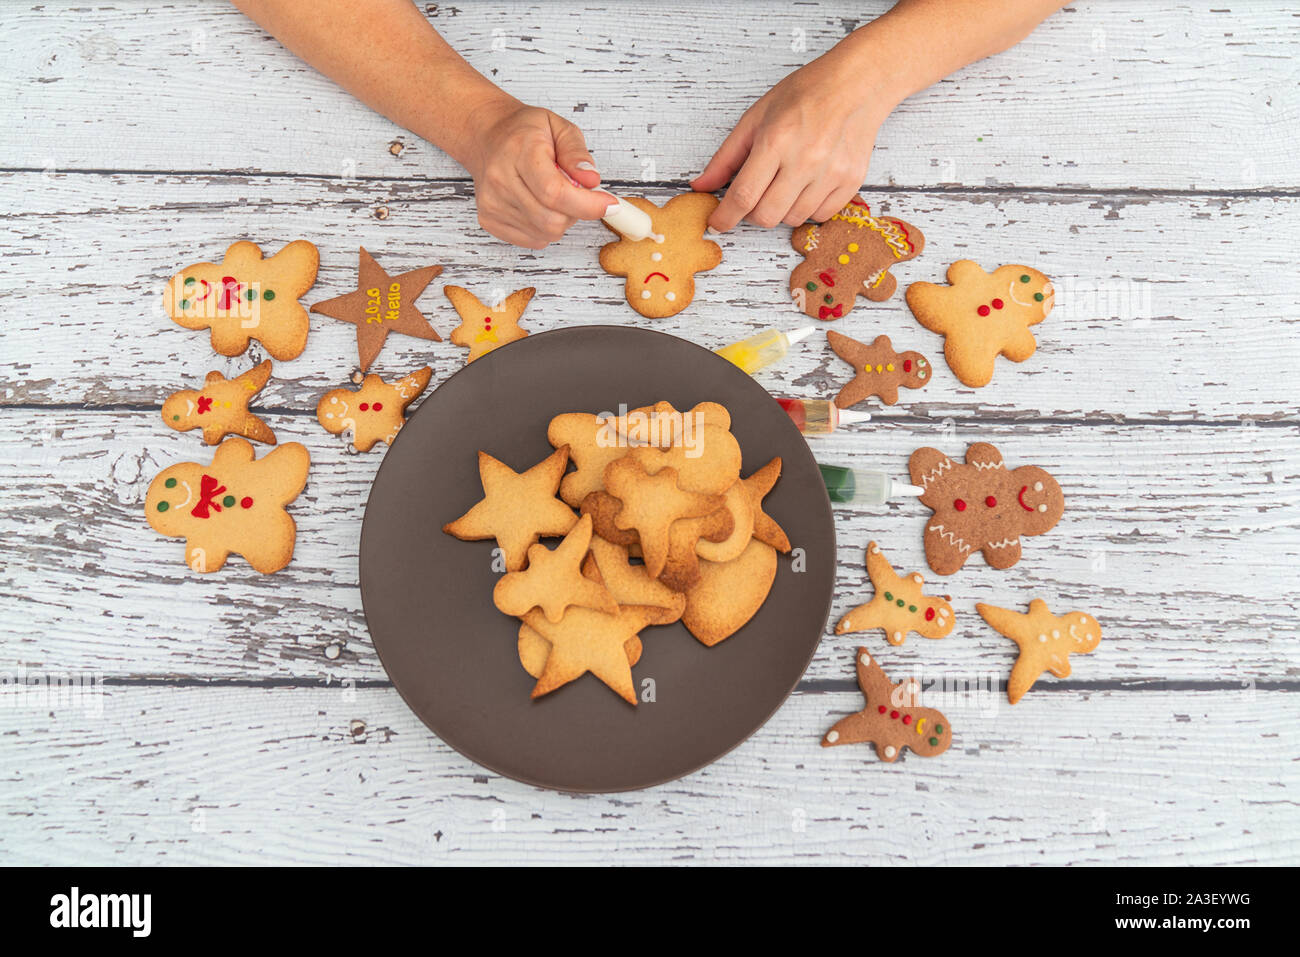 Preparing traditional gingerbread cookies for new year celebration. Stock Photo